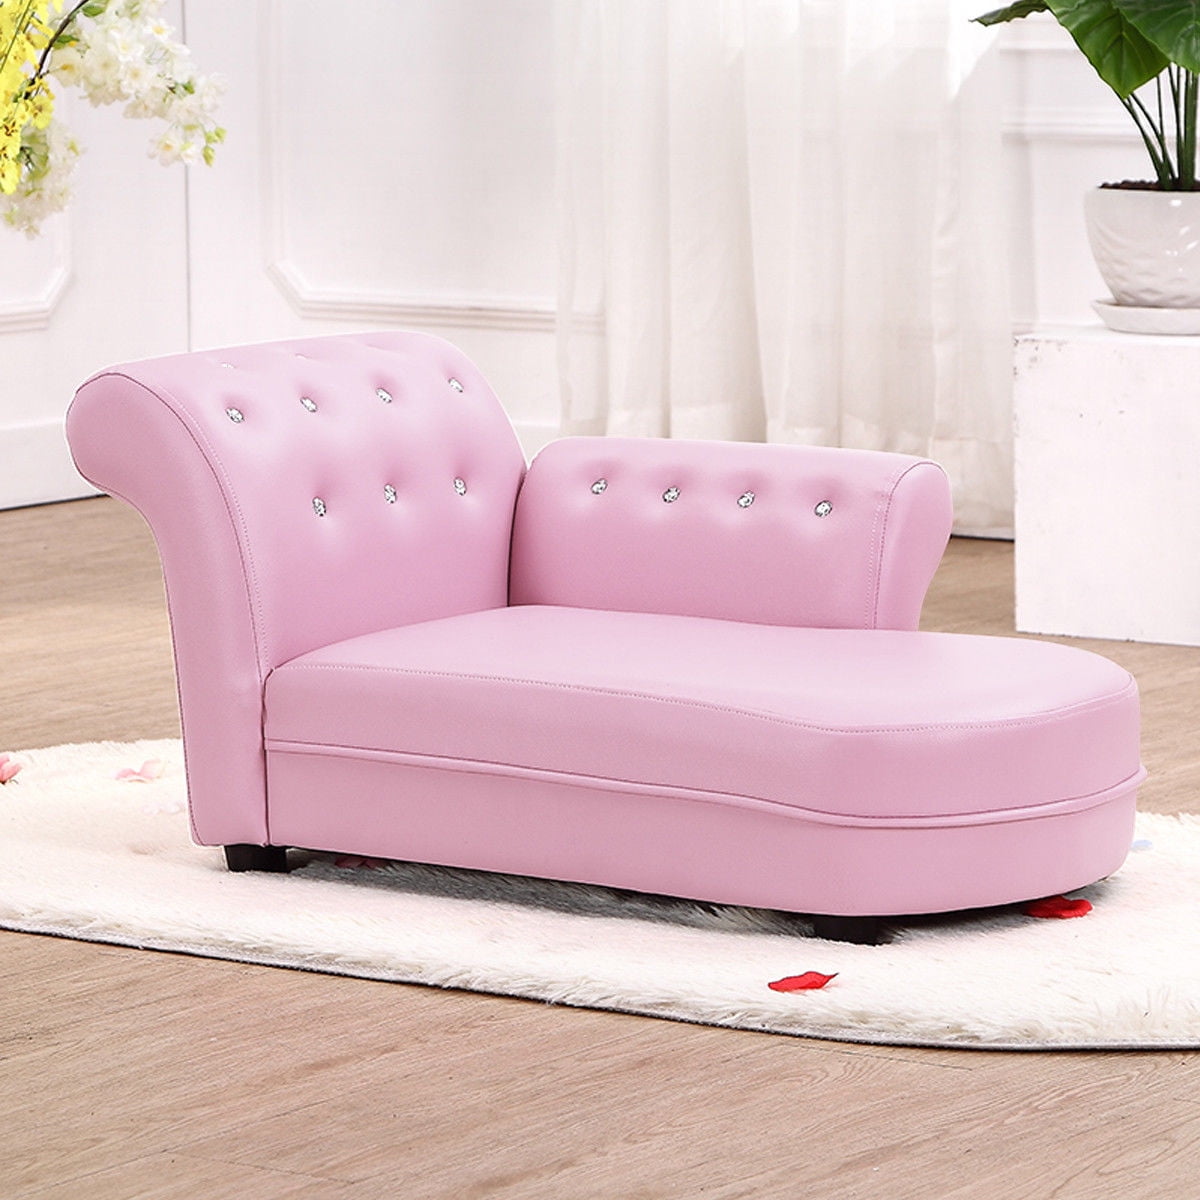 Fashion Soft Living Room Kids Armrest Chair Couch Sofa w/ Pillow Home Furniture 